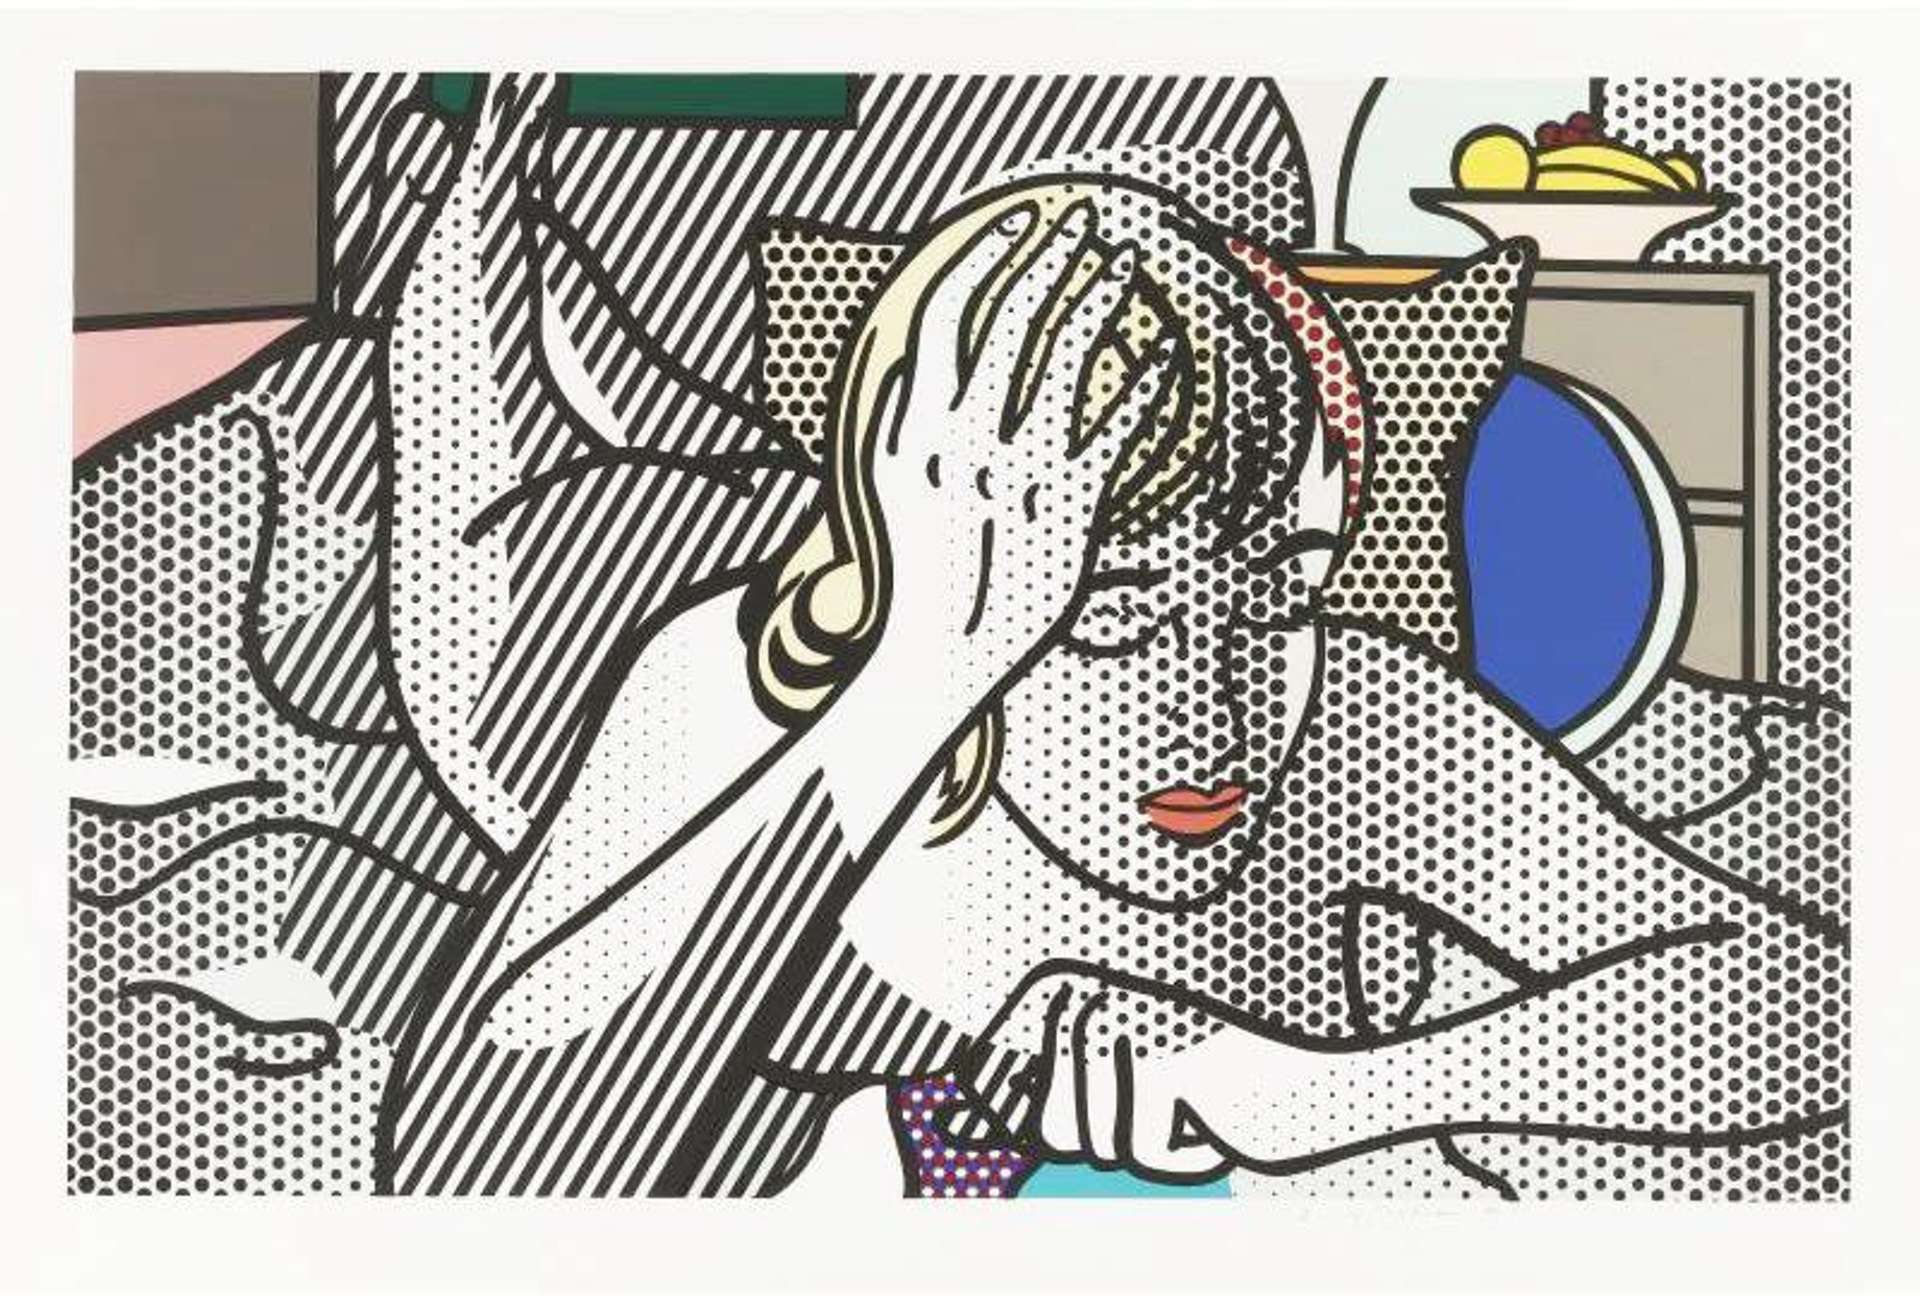 Roy Lichtenstein’s Thinking Nude. A Pop Art style comic depicting a nude woman suggesting that she is lost in thought.